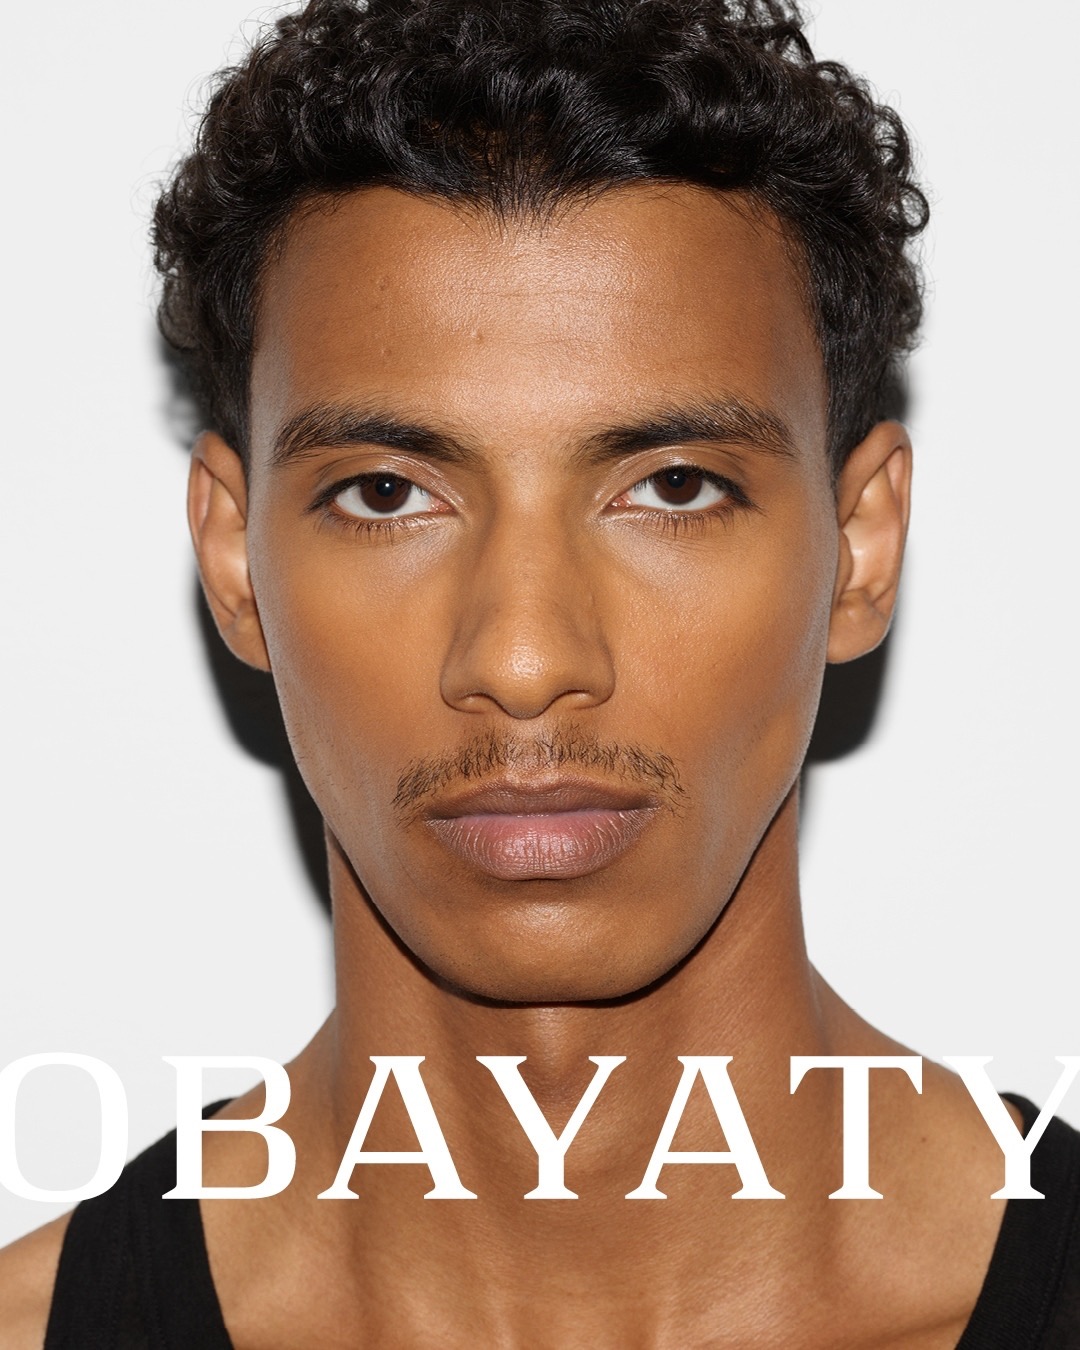 Men’s Beauty Brand Obayaty Is Here + More Beauty News